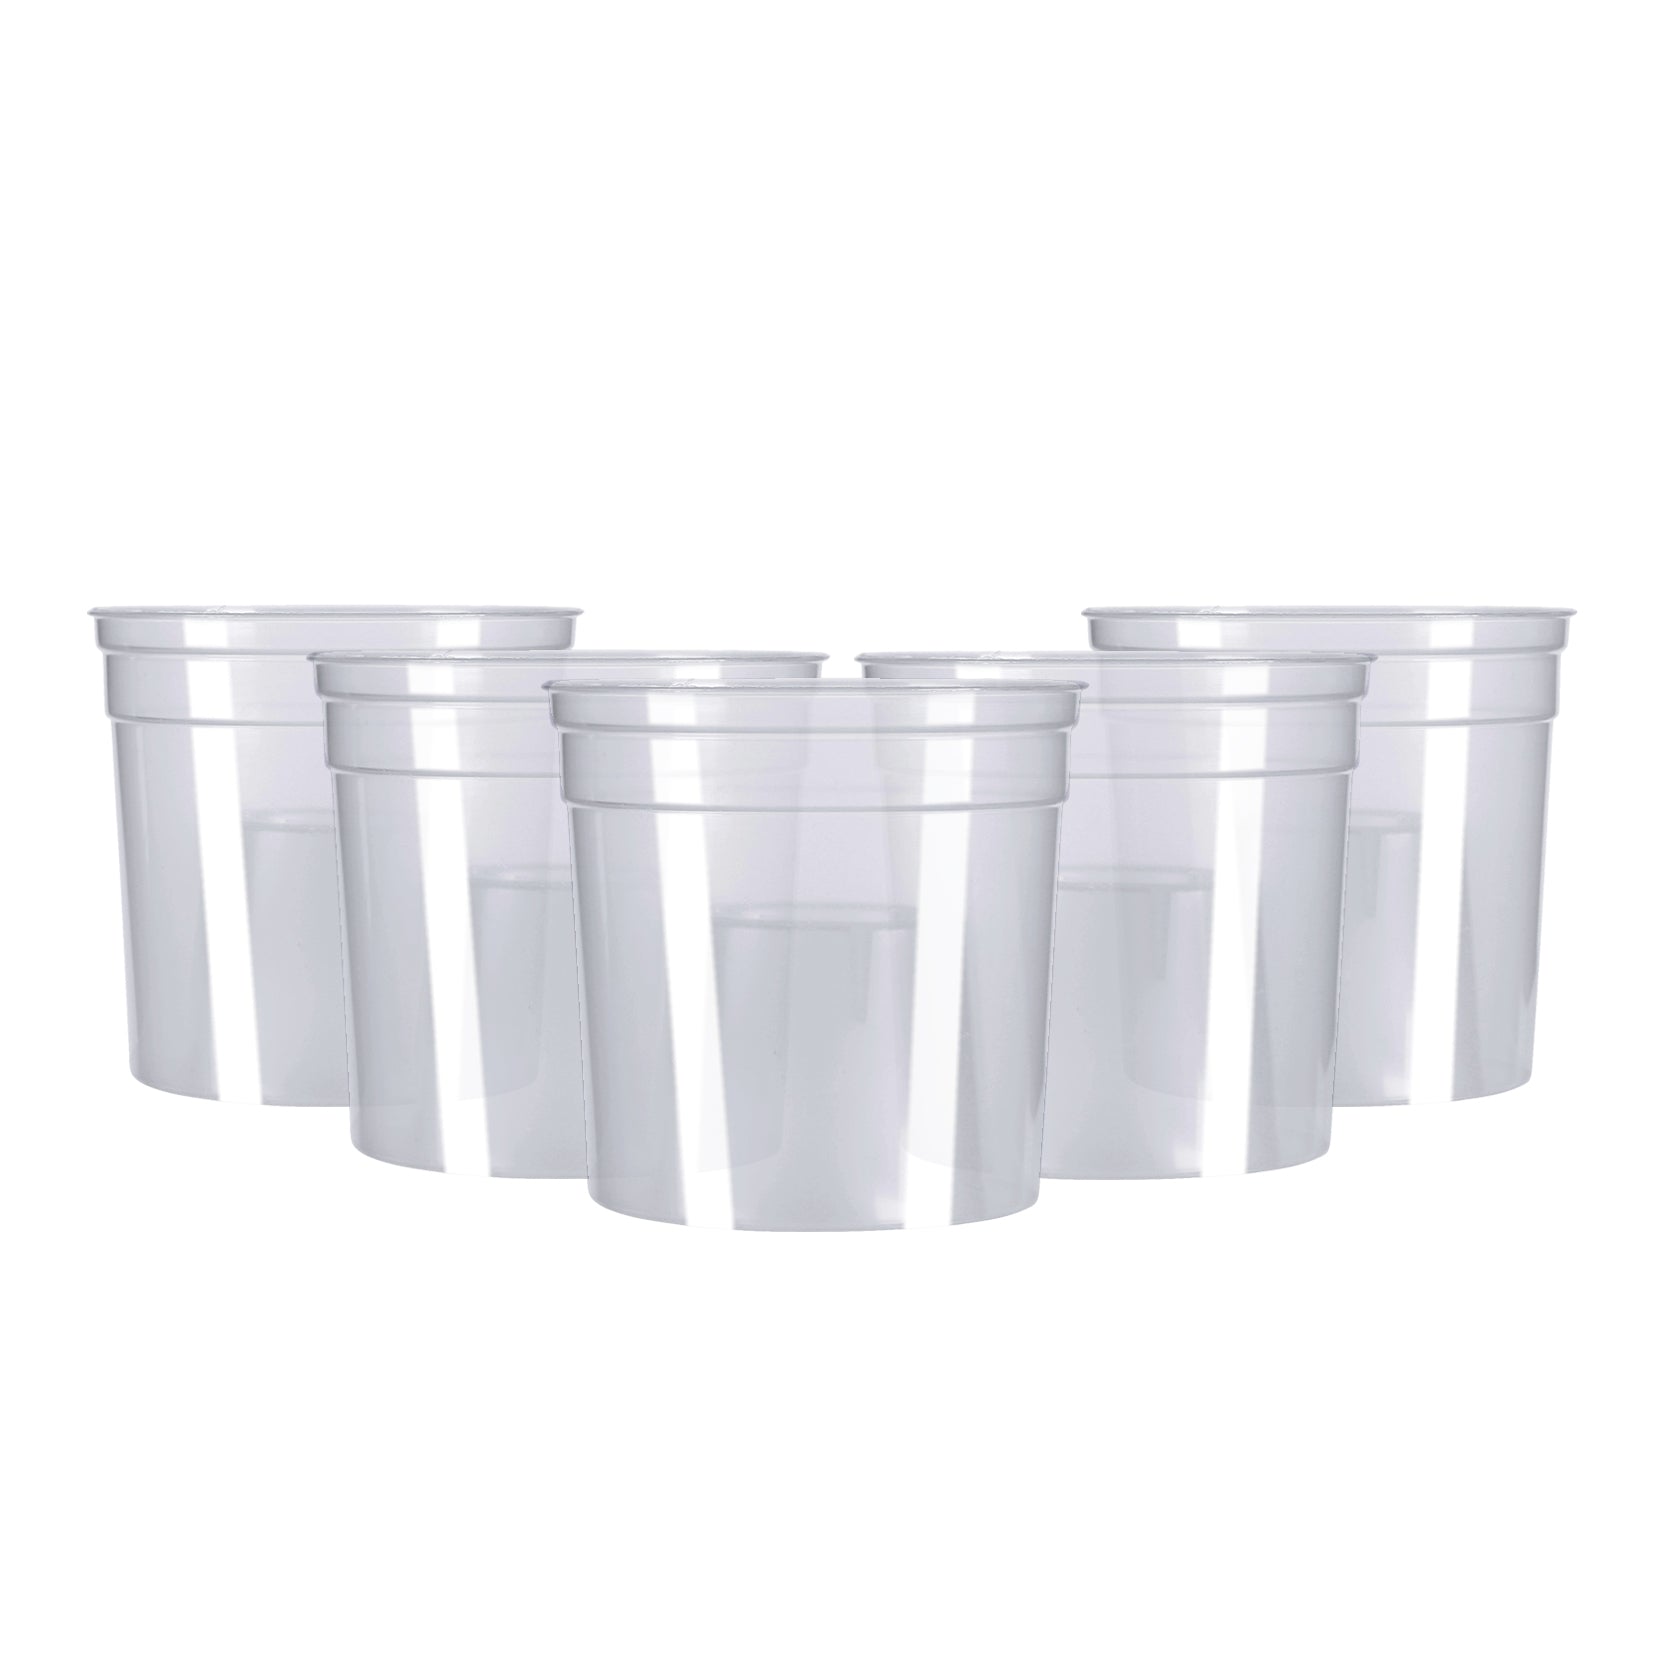 50 x Jager Bomb Shot Glasses Heavy Duty Strong Reusable Plastic 25ml CE Marked Measure, Mixer Stackable. Cups BBQs Parties Clubs Bars-5056020179801-PCUP-SHOTBOMB-x50-Product Pro-Jager Bomb, Jagerbomb Glasses, Jagermeiser, Reusable, Shot Glasses, Shots